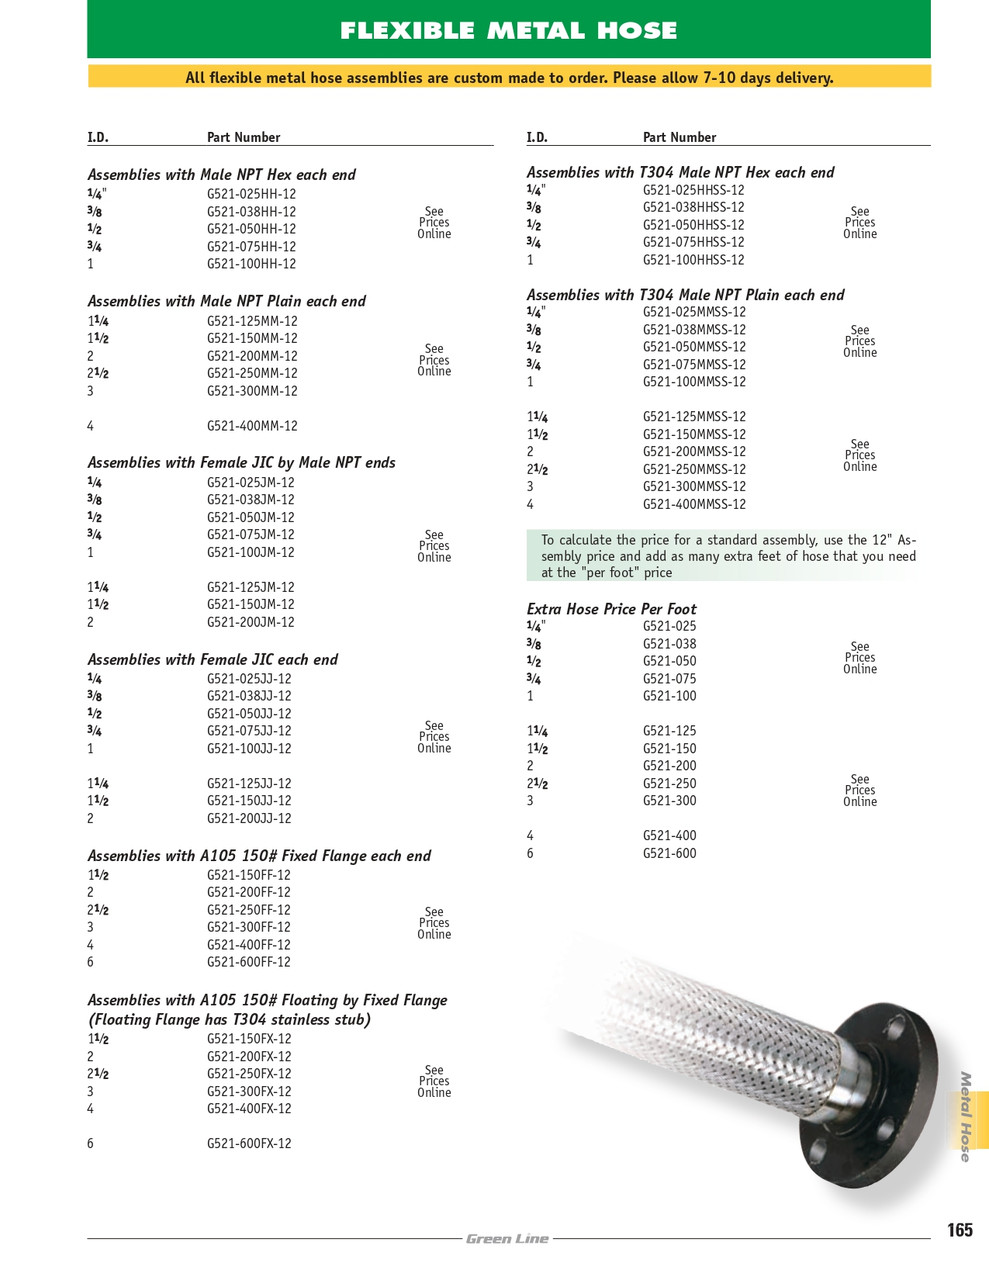 2-1/2 x 2-1/2" x 12" Stainless Steel Hose Assembly w/ A105 150# Floating X Fixed Flange Ends   G521-250FX-12